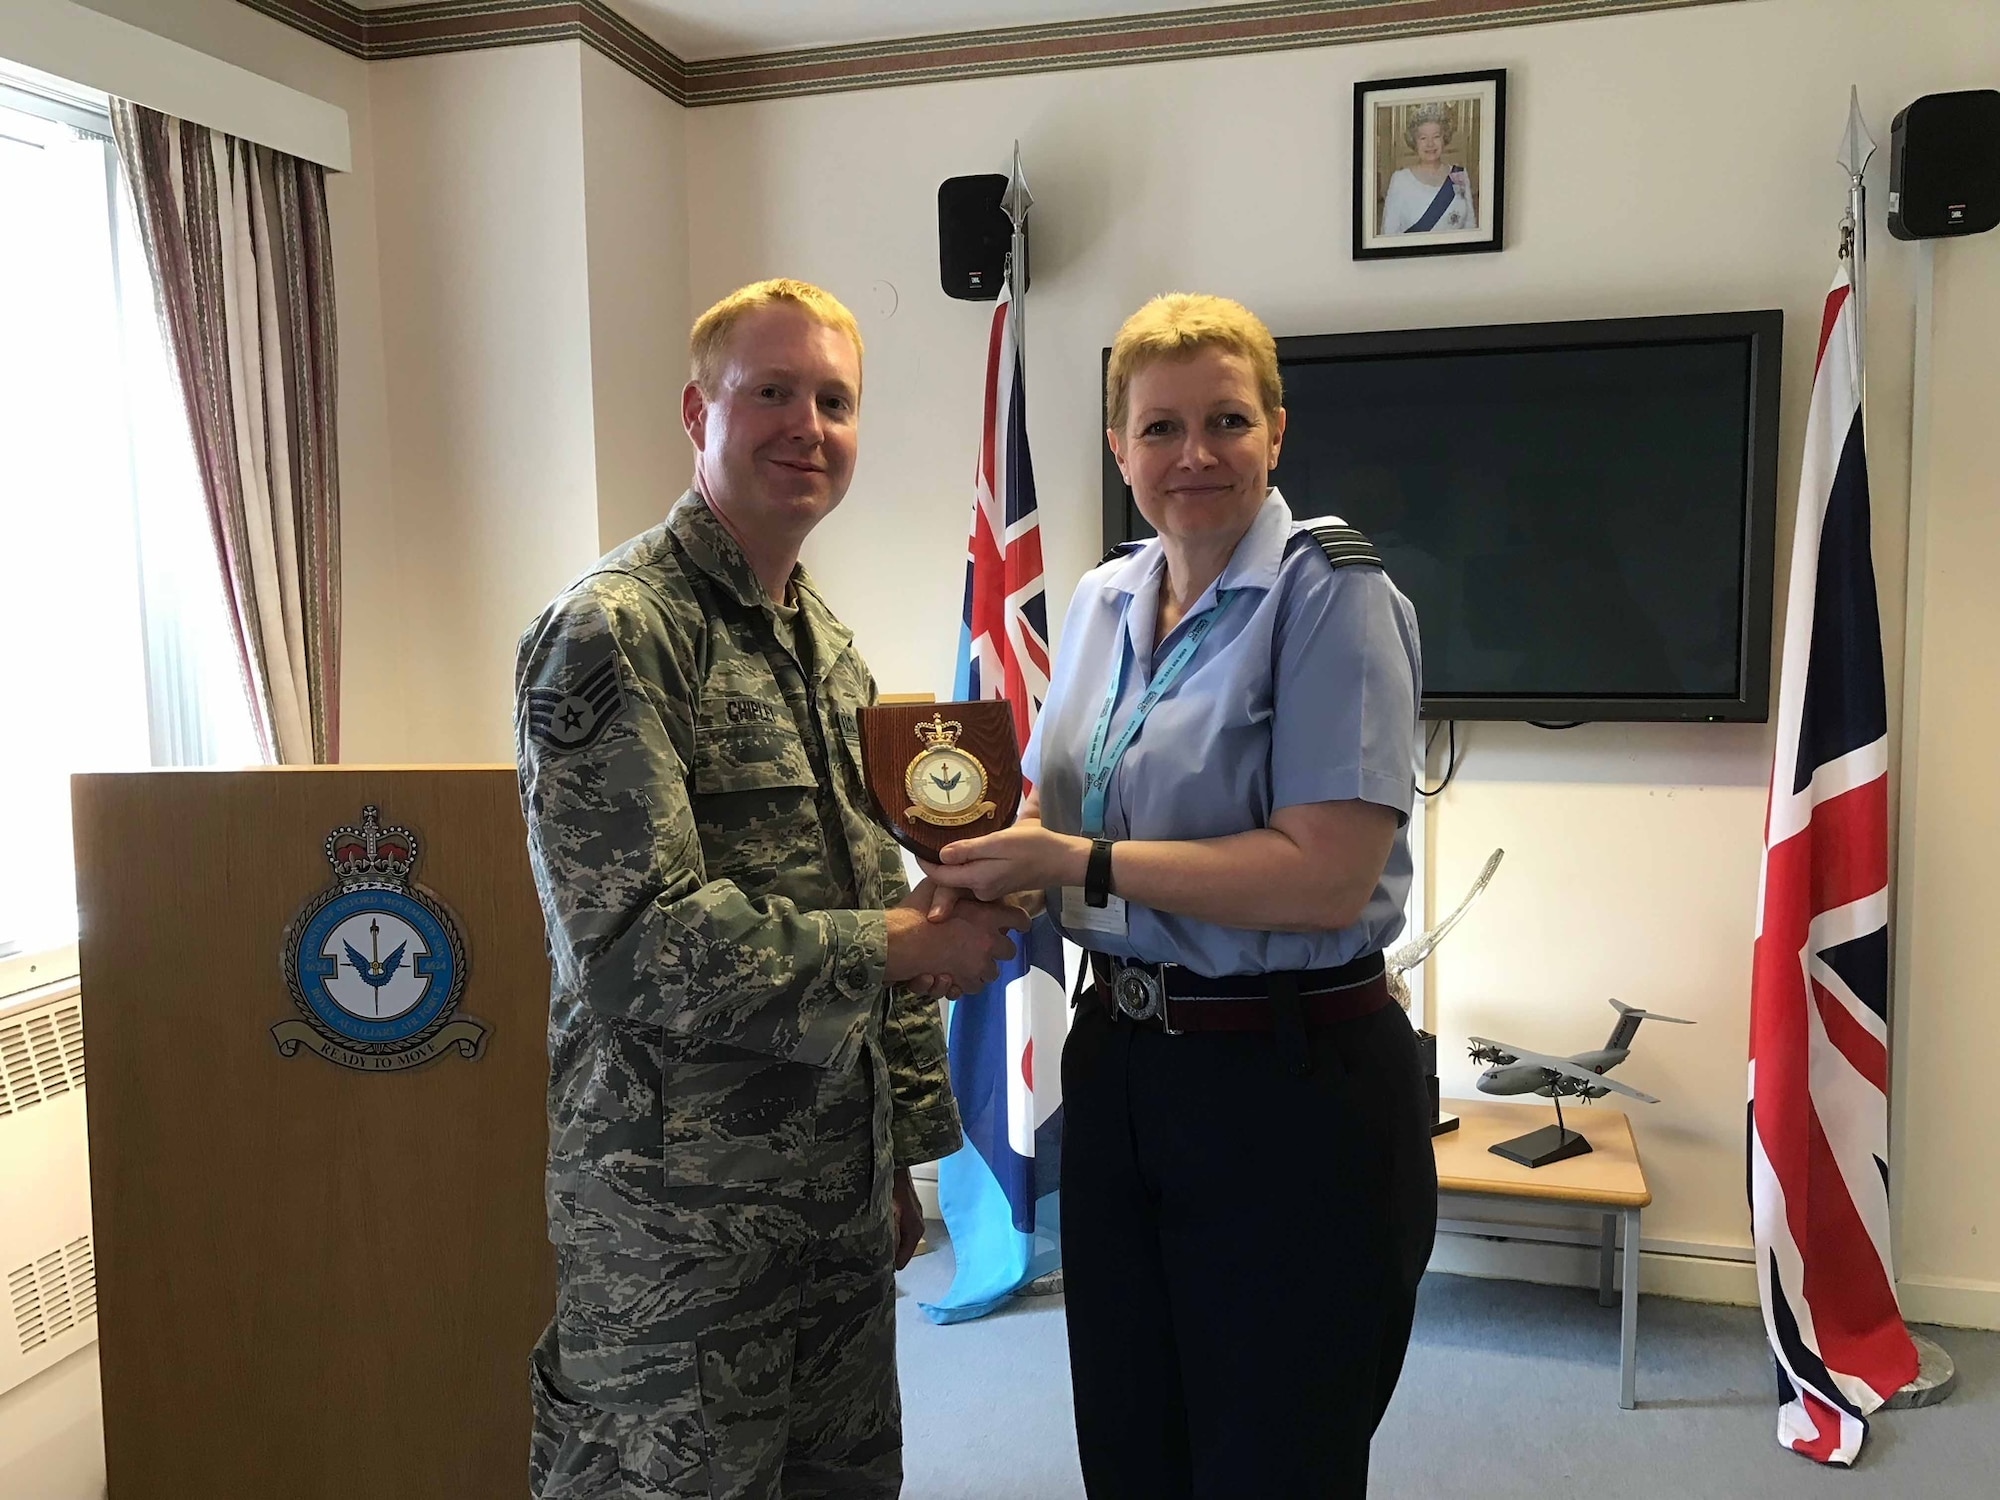 U.S. Air Force Staff Sgt. Jason Chipley, 145th Logistics Readiness Squadron, receives a squadron plaque from the commanding officer of the 4624 Squadron Royal Air Force Reserves, Oxfordshire, United Kingdom, July 19, 2018. The Military Reserve Exchange Program provides National Guard and Reserve Participants training associated with mobilization duties while enhancing their ability to work and communicate with military individuals of the host nation.